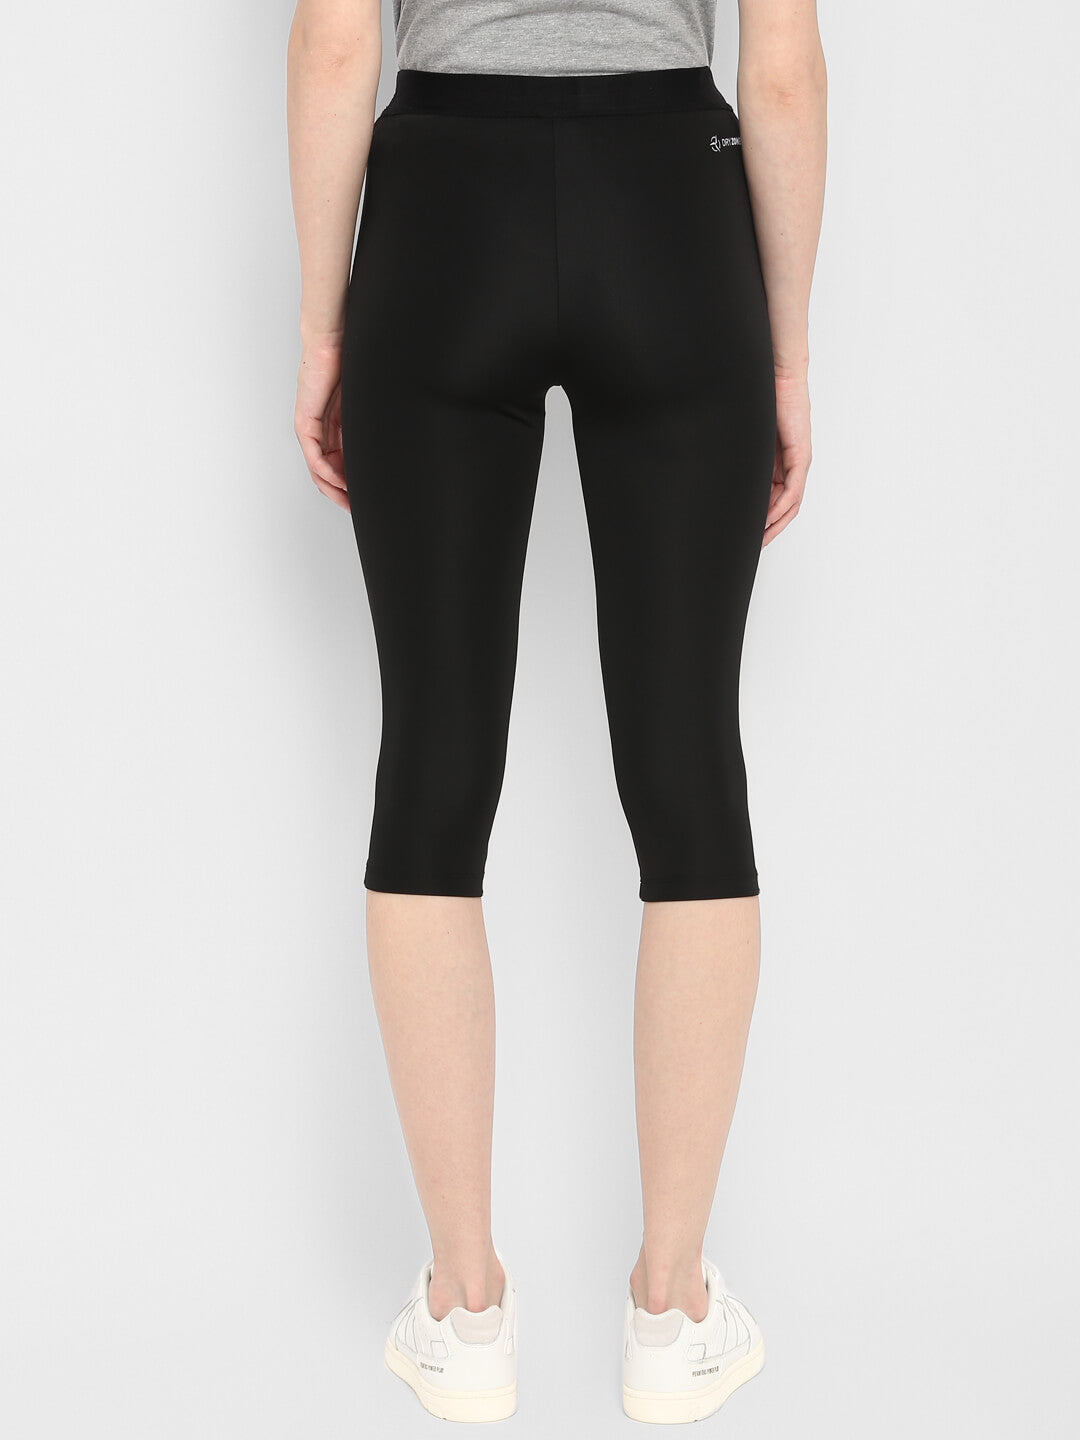 Maybe Black Tights for Women